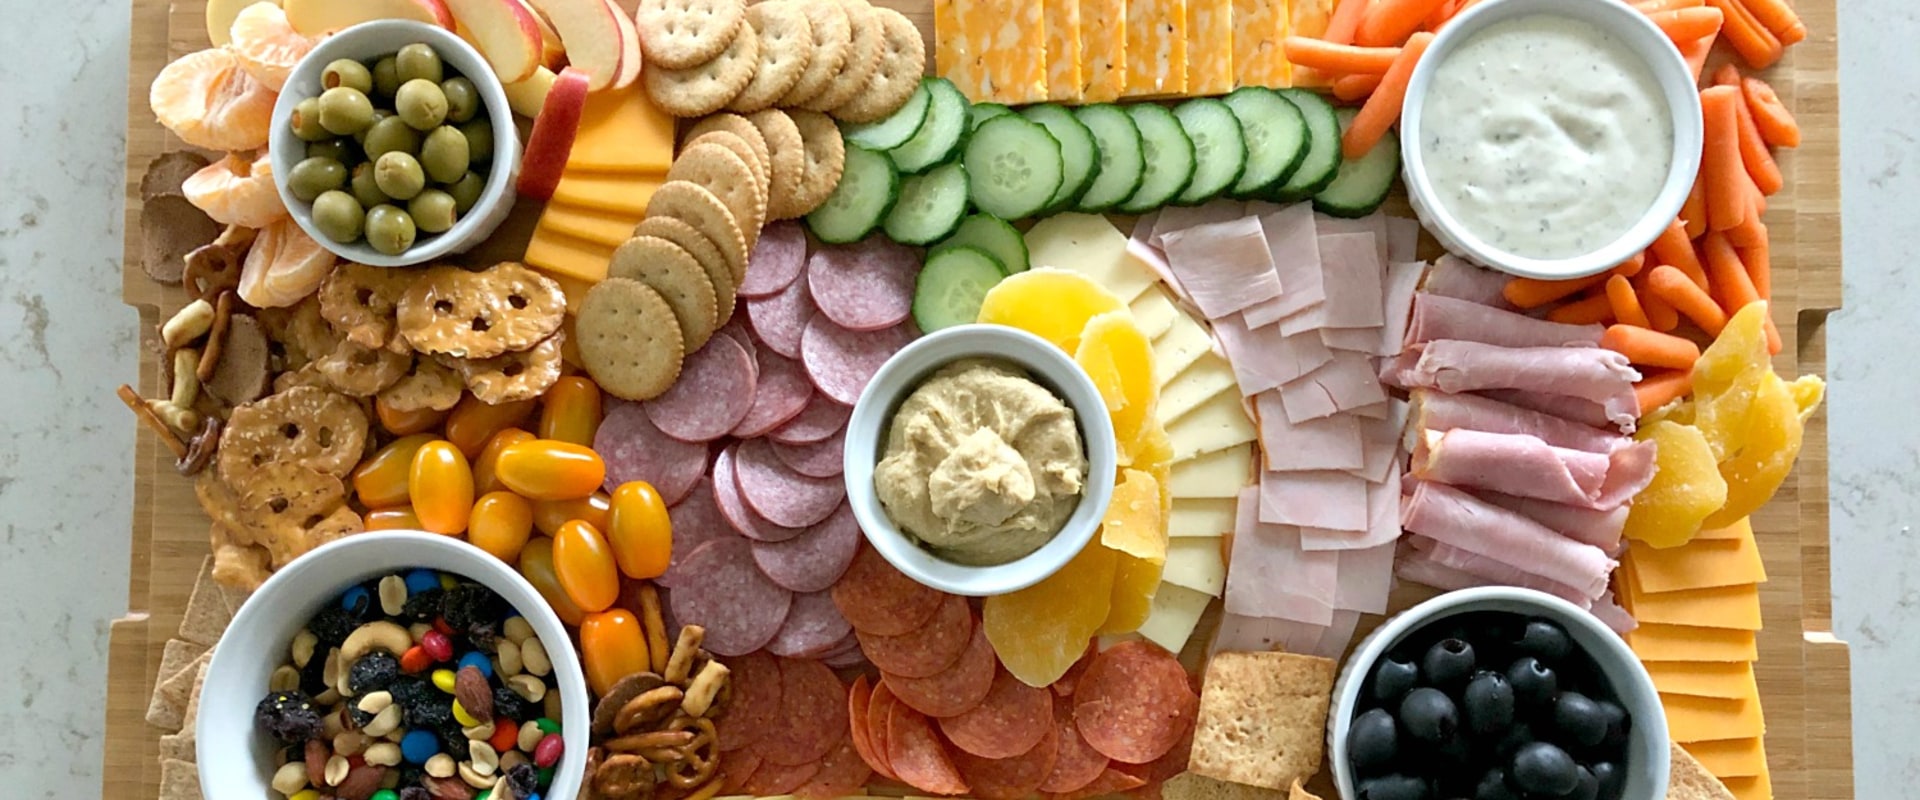 Family-Friendly Cheese Platters - A Fun Appetizer Idea